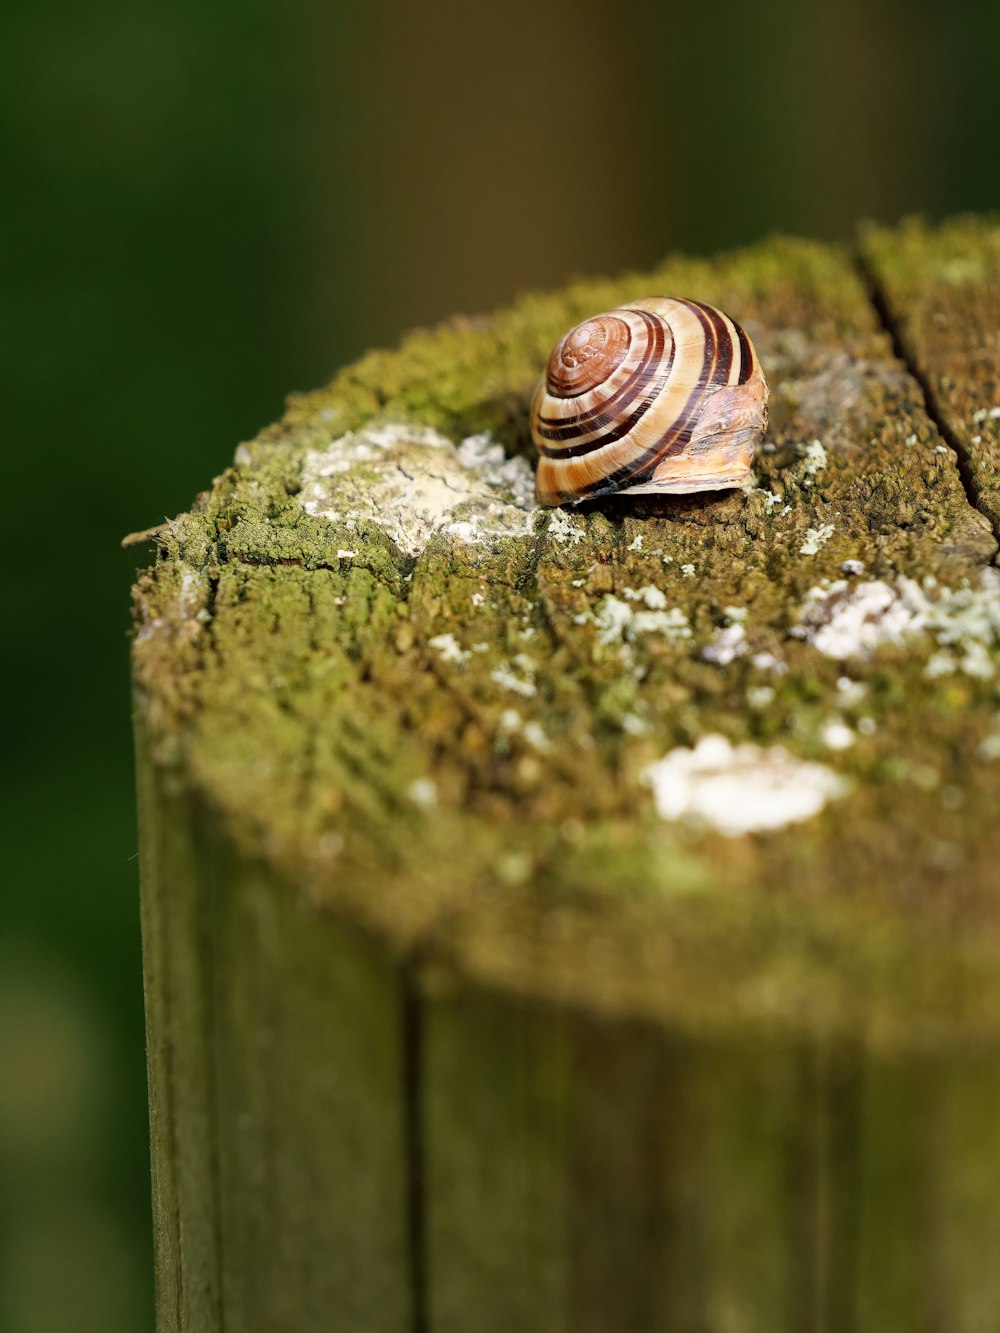 a snail that is sitting on a piece of wood